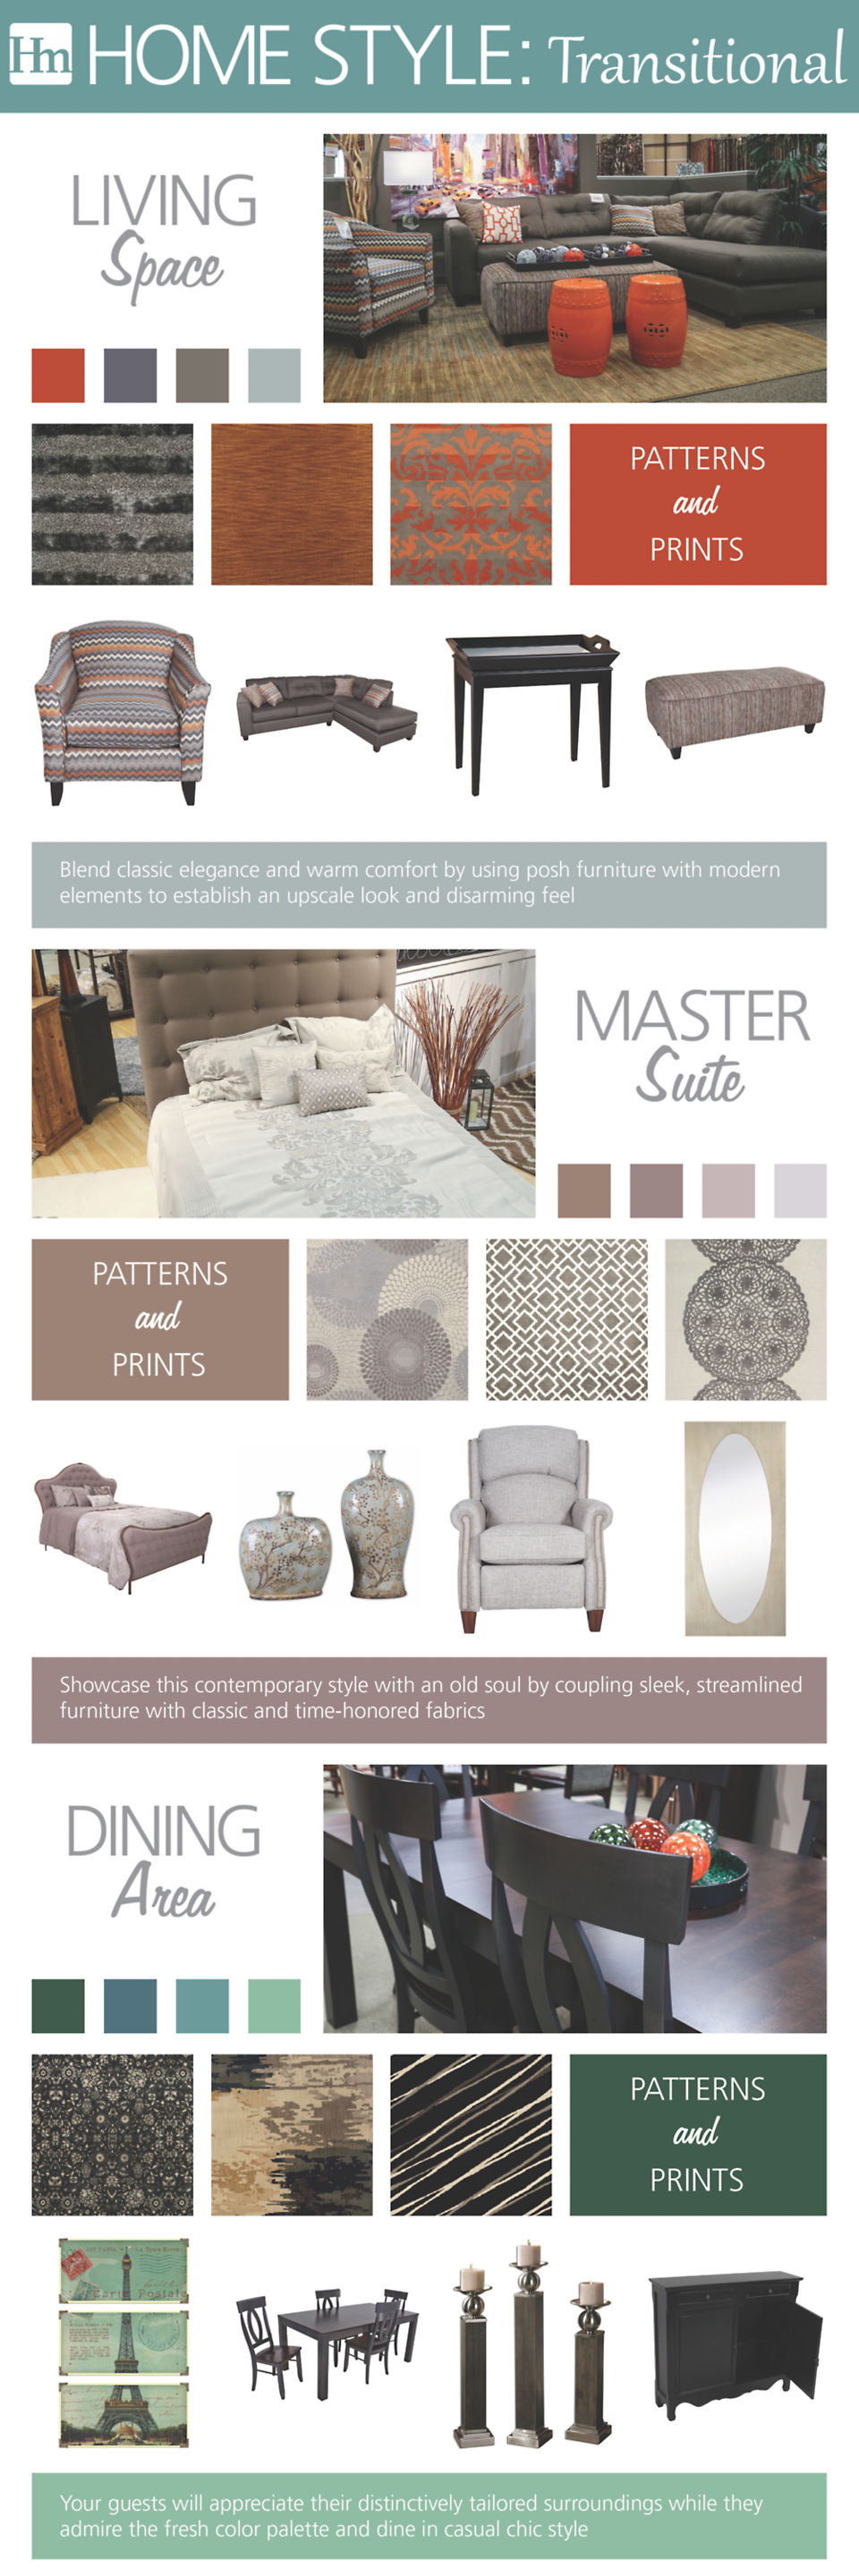 Transitional style interior design infographic